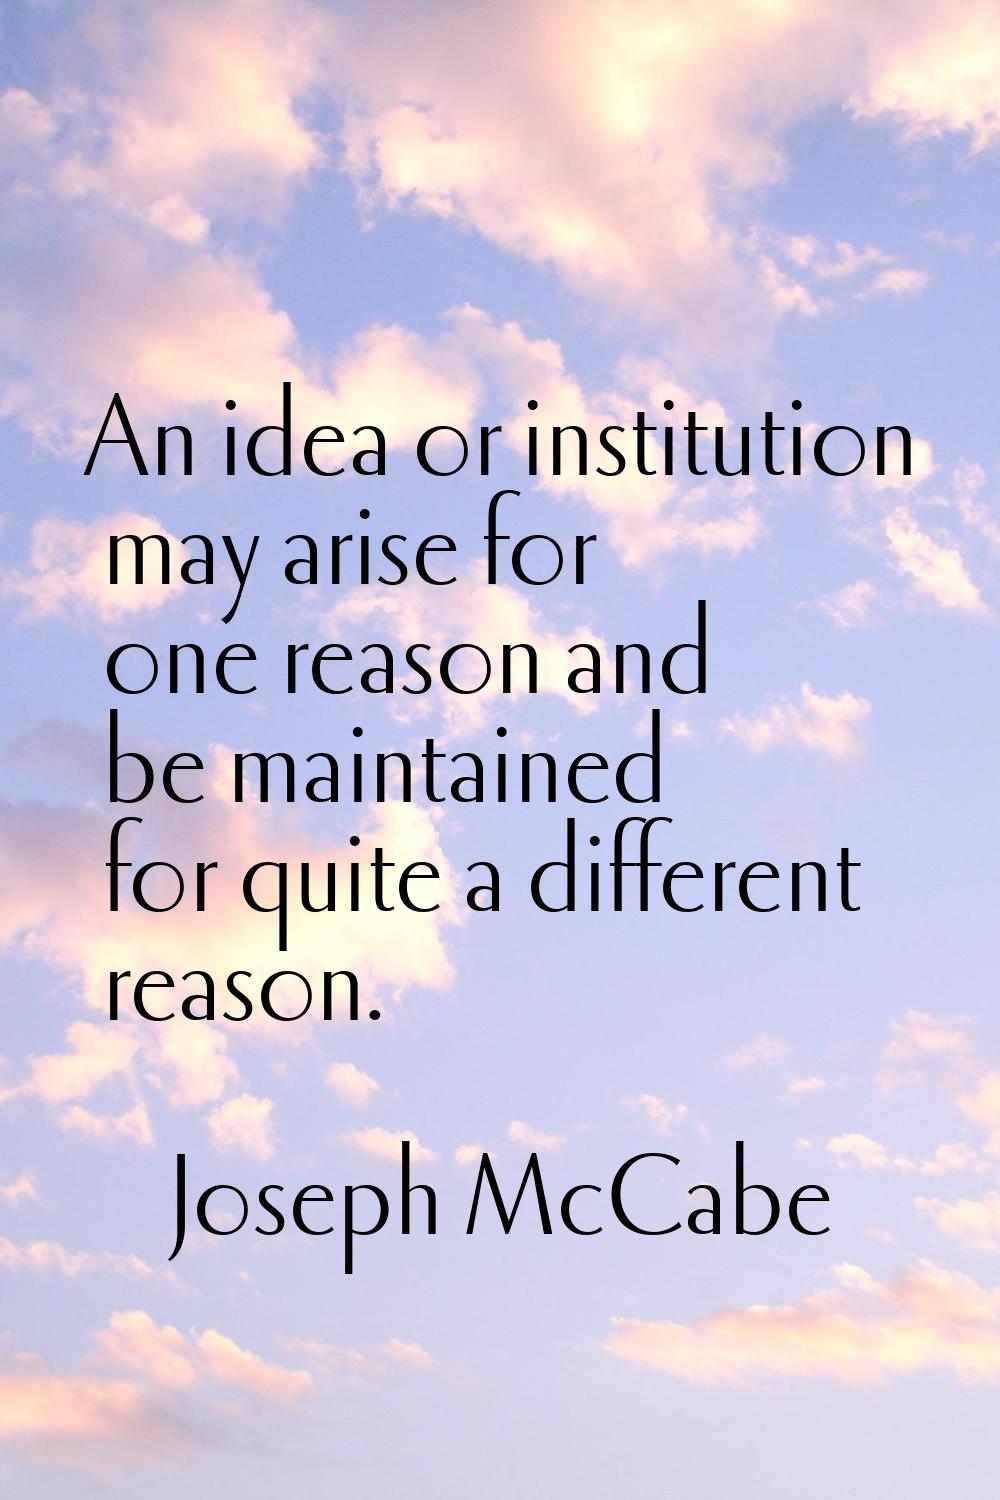 An idea or institution may arise for one reason and be maintained for quite a different reason.